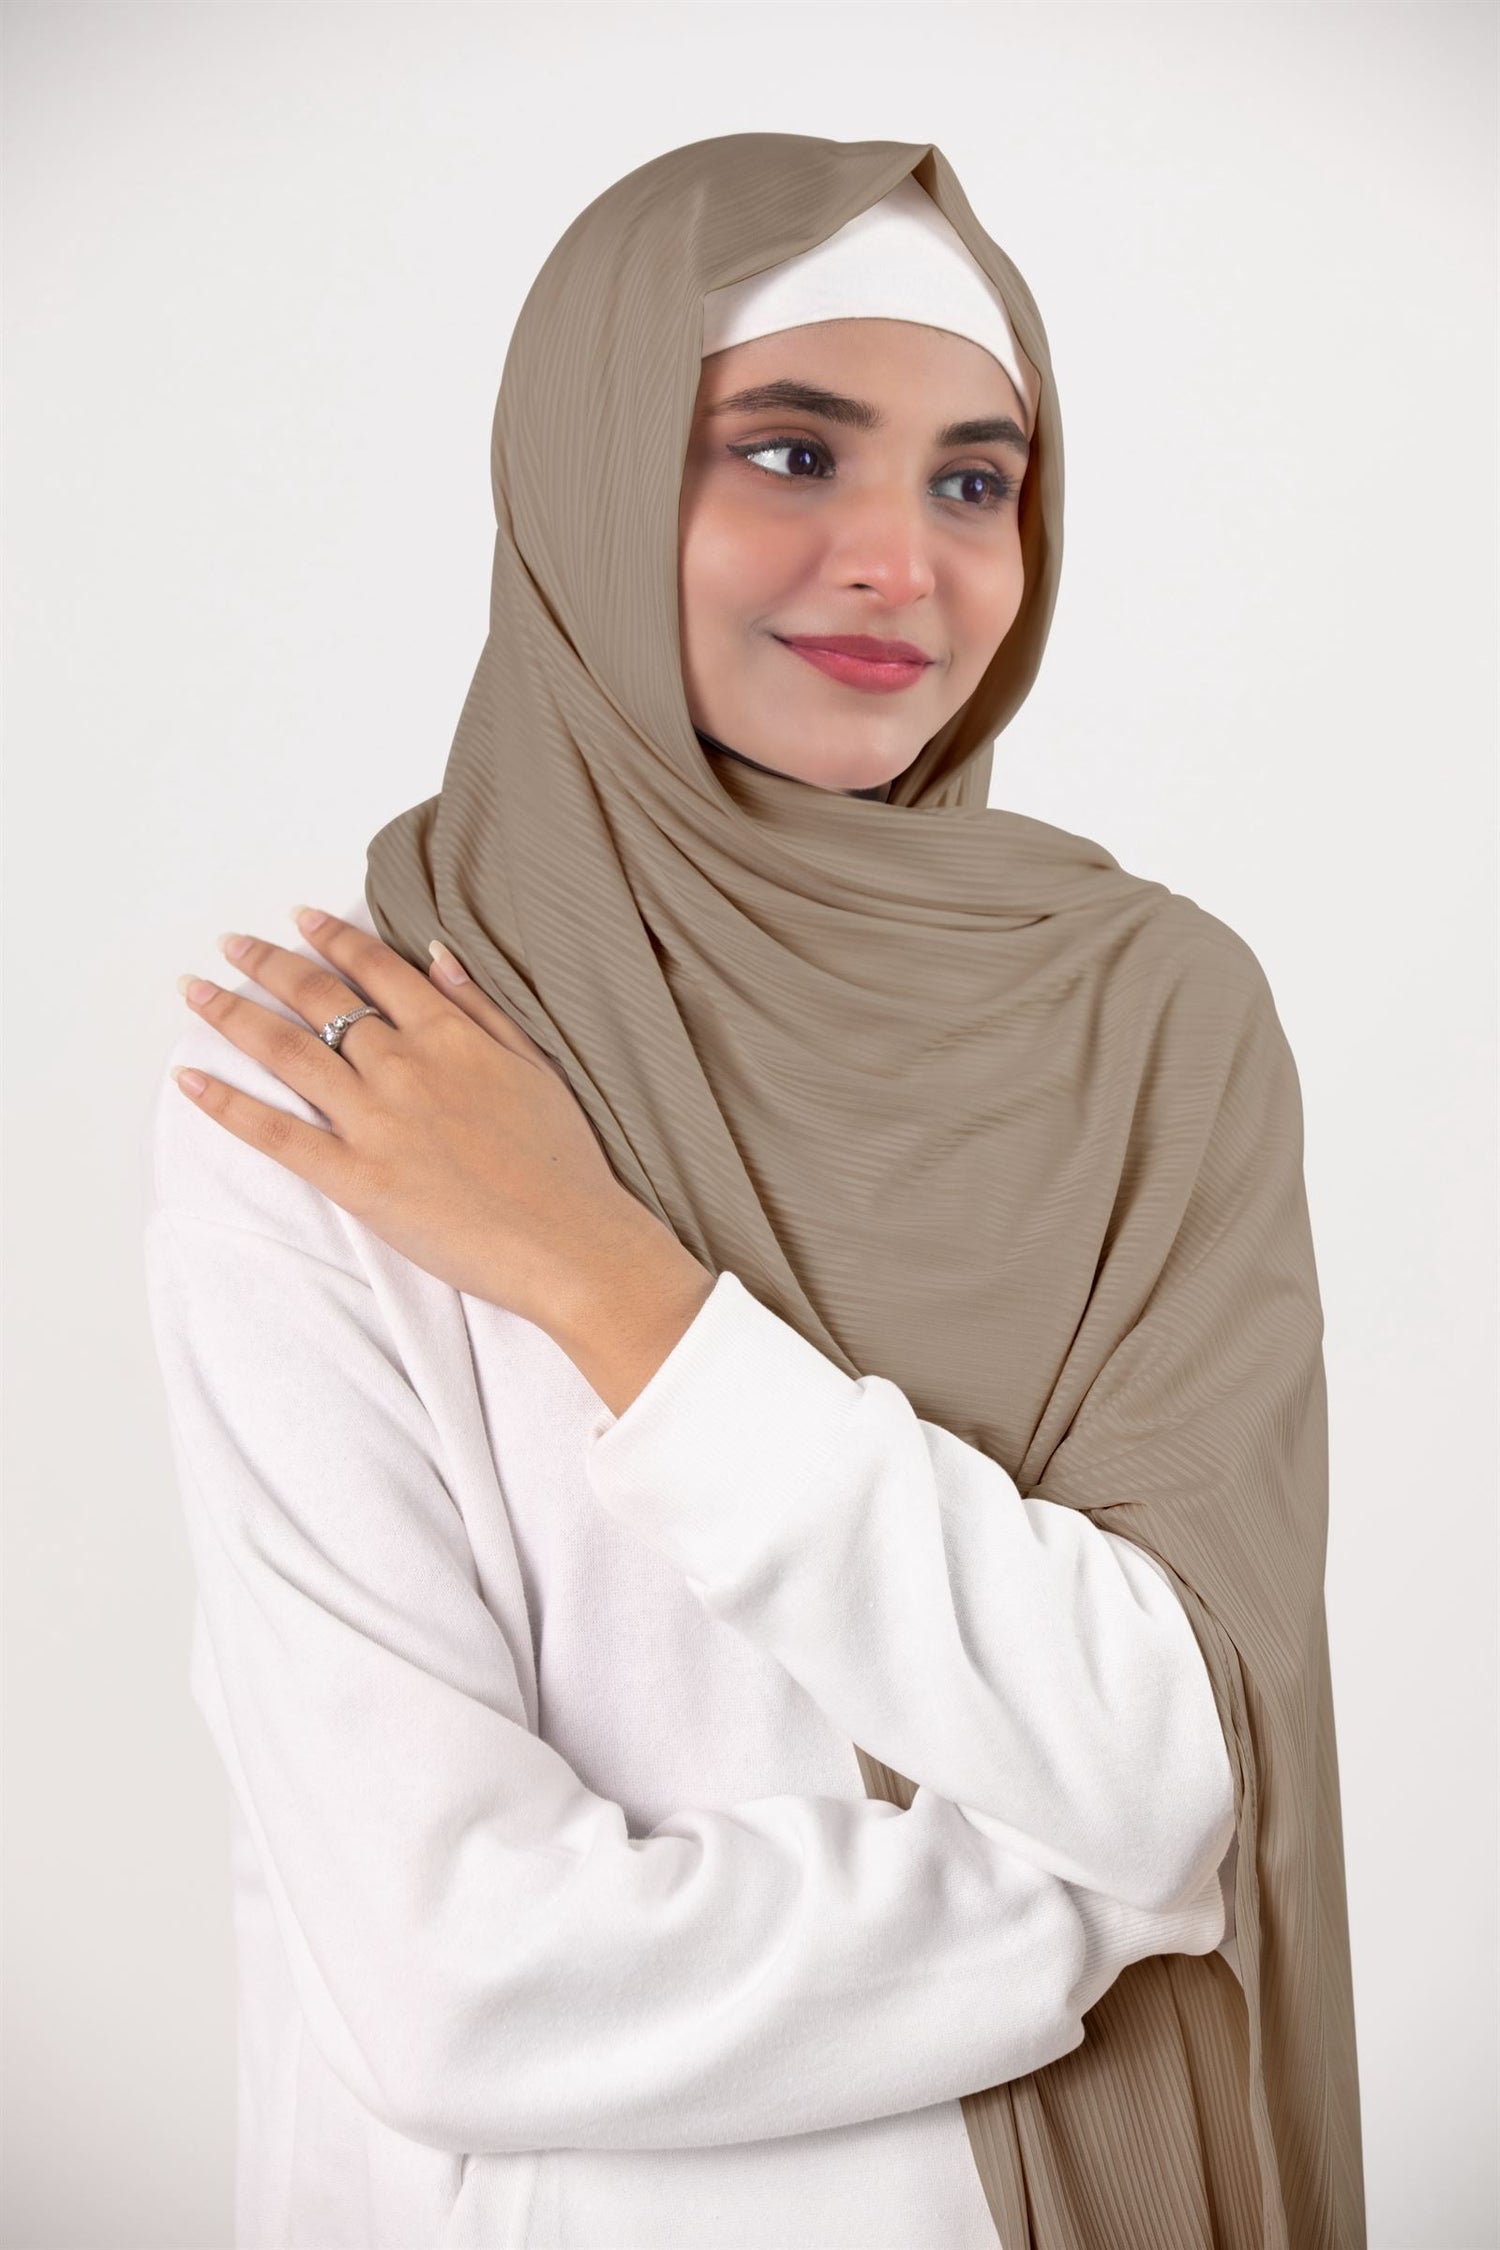 Ribbed Jersey Hijab in Oatmeal